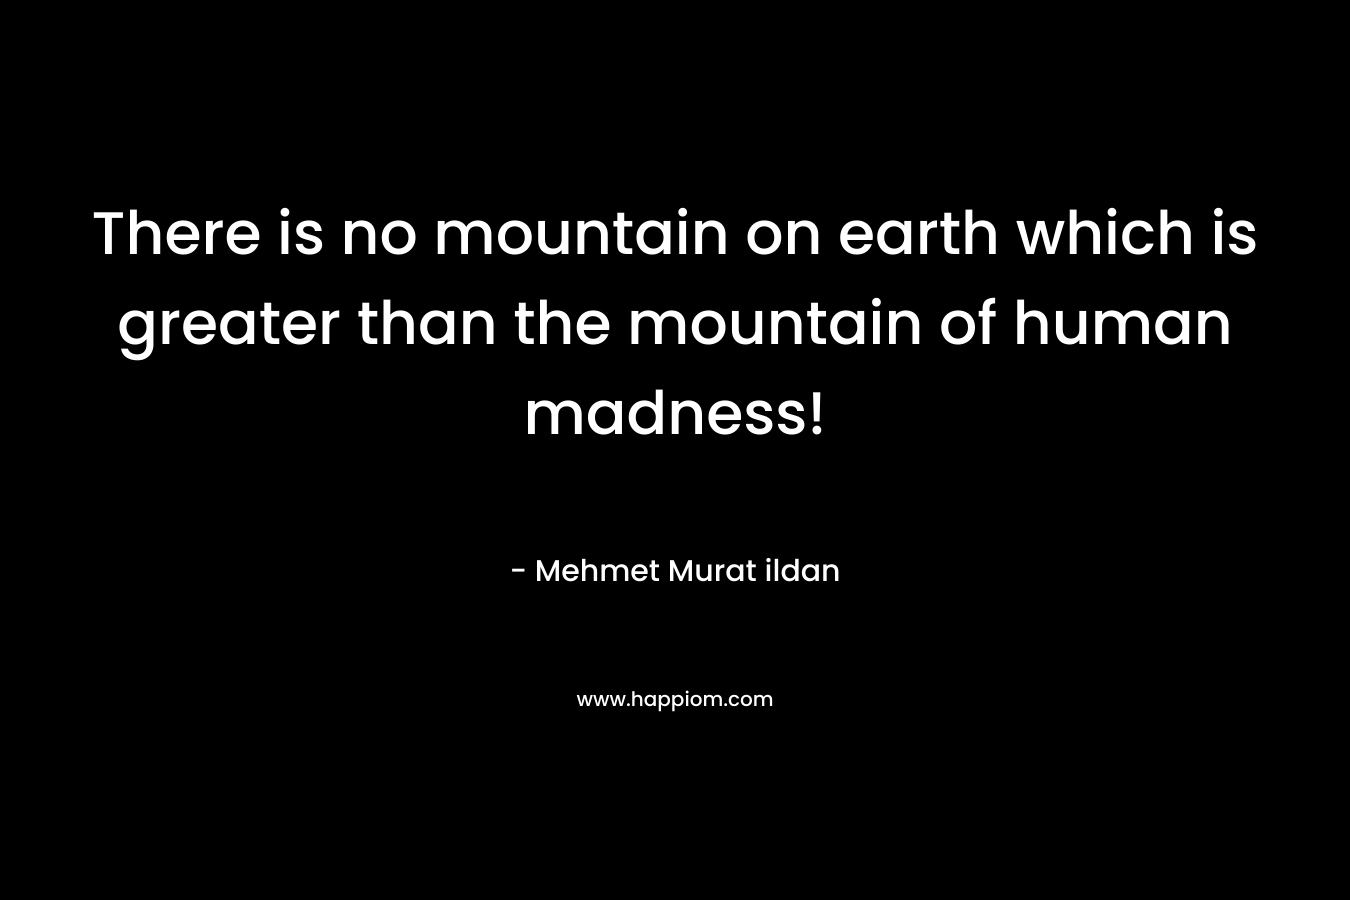 There is no mountain on earth which is greater than the mountain of human madness!